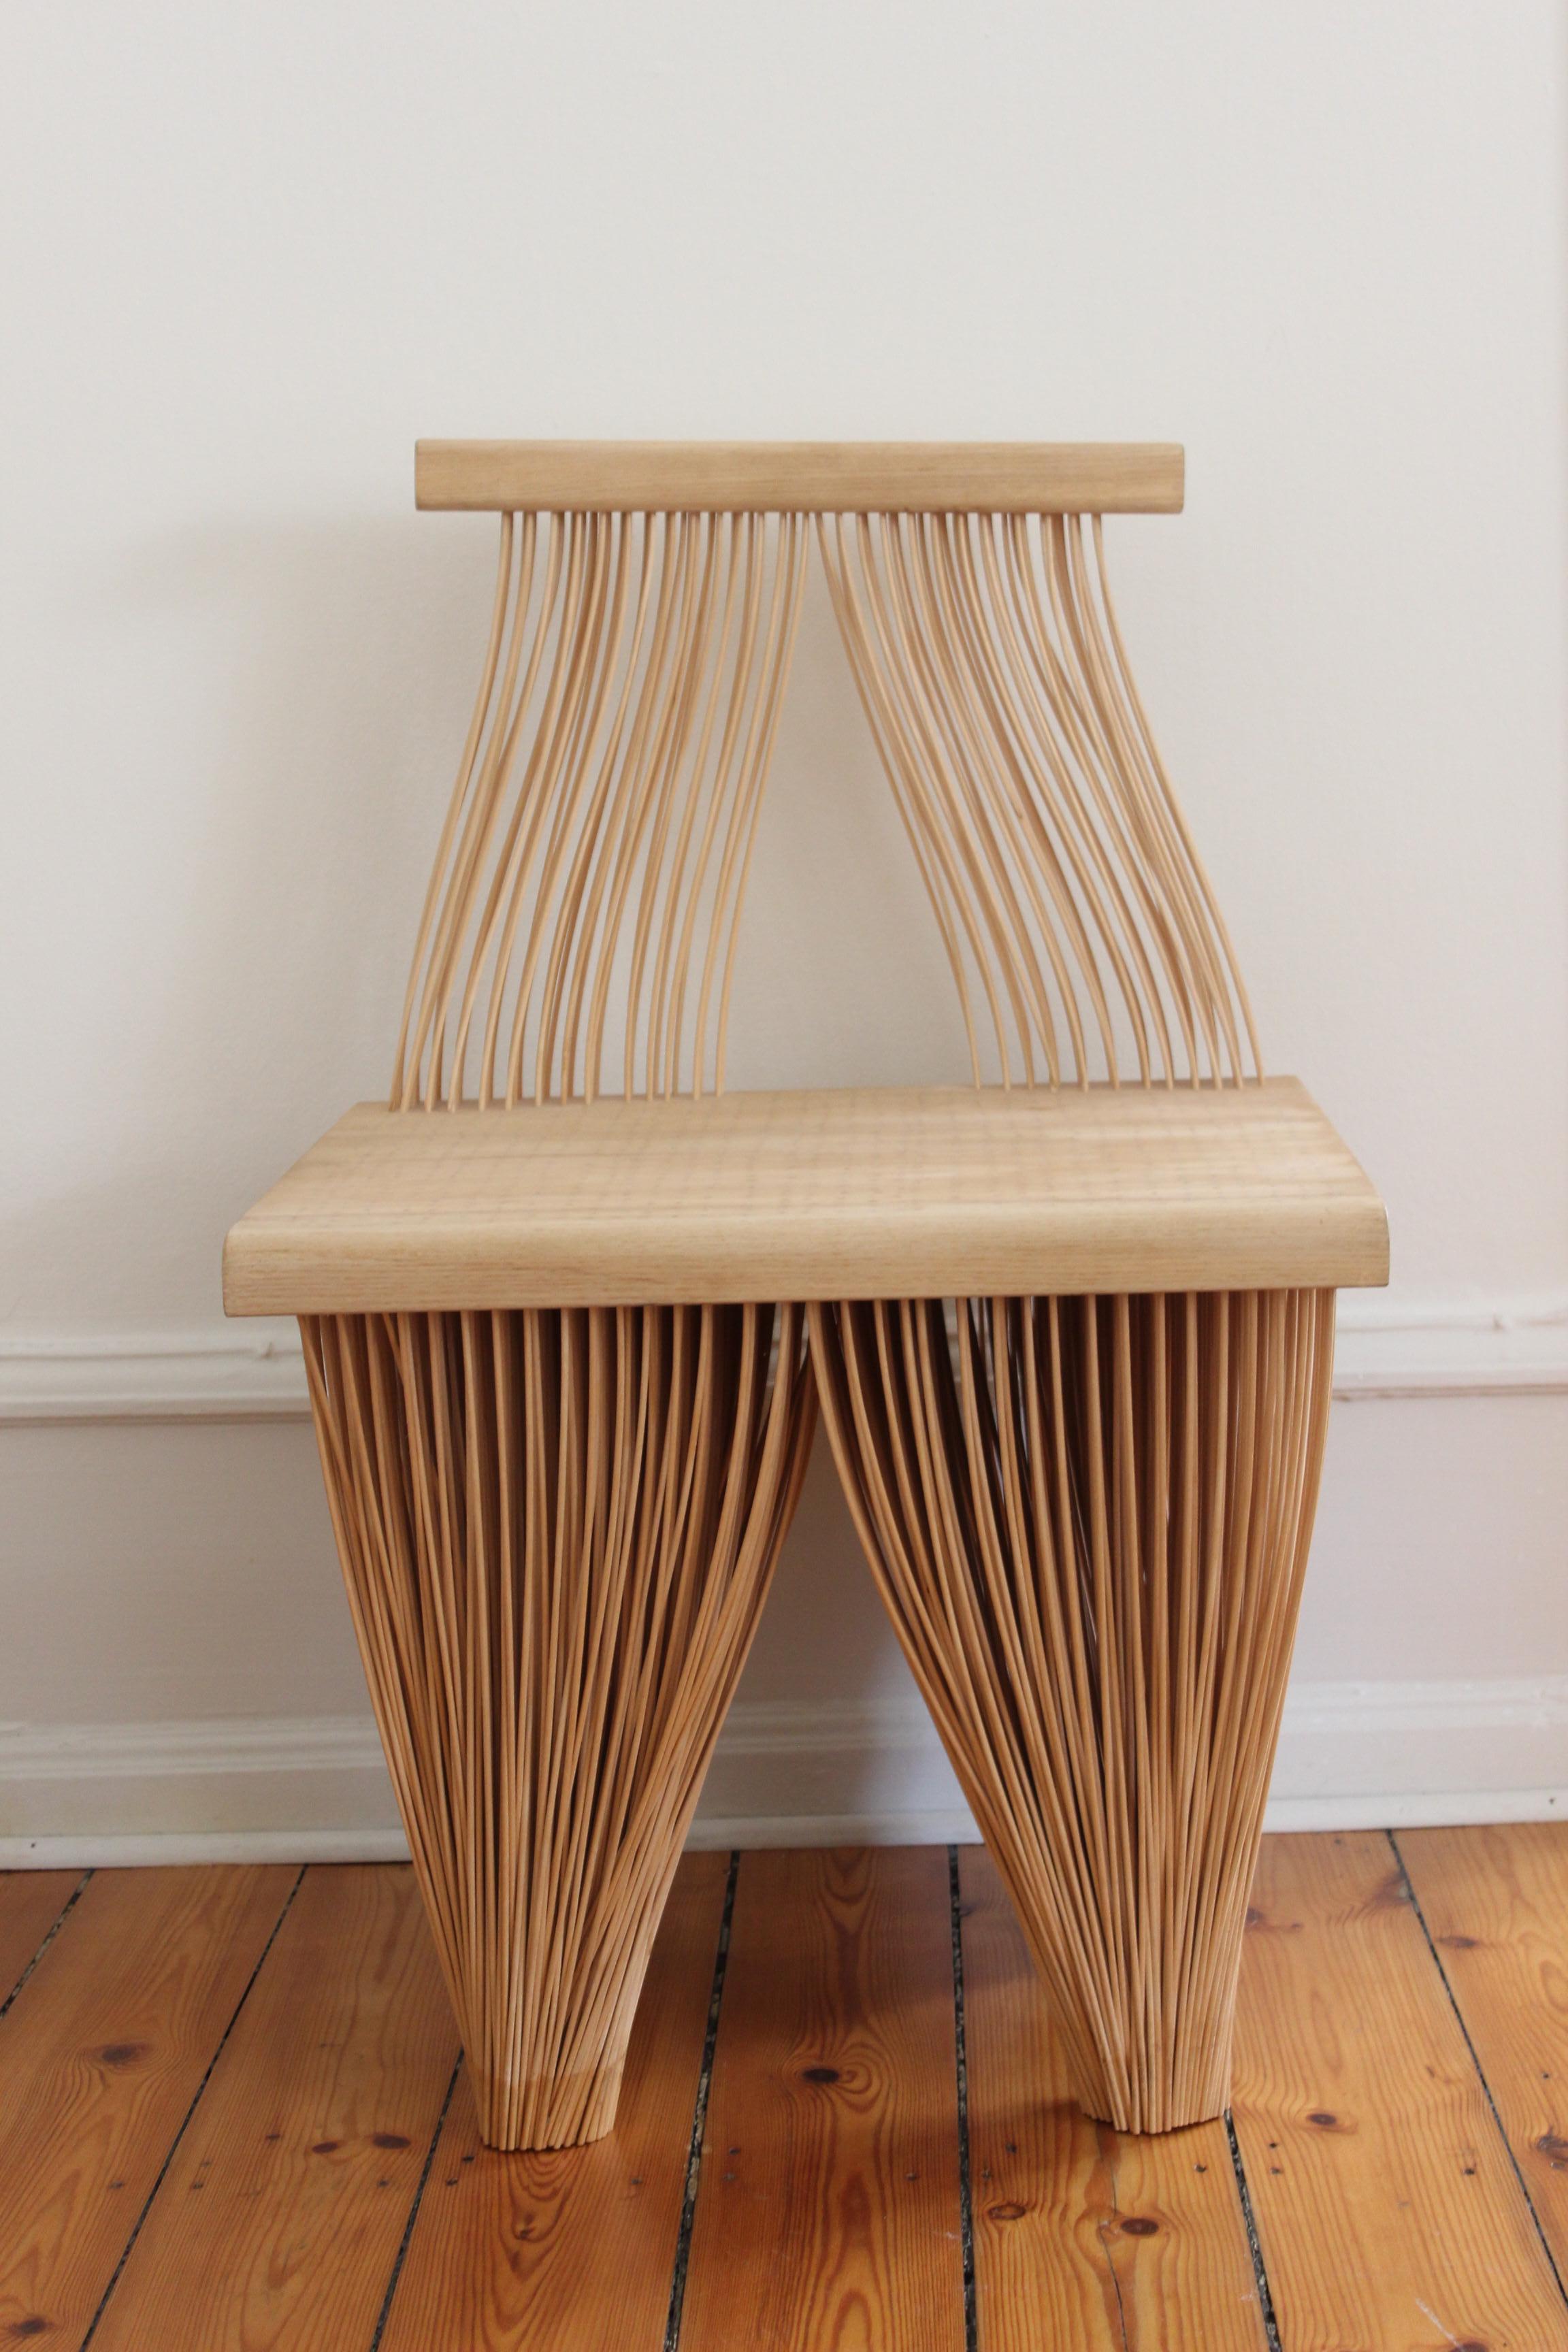 Organic Modern Contemporary Japanese Inspired Wood Hallway Statement Sculptural Chair  For Sale